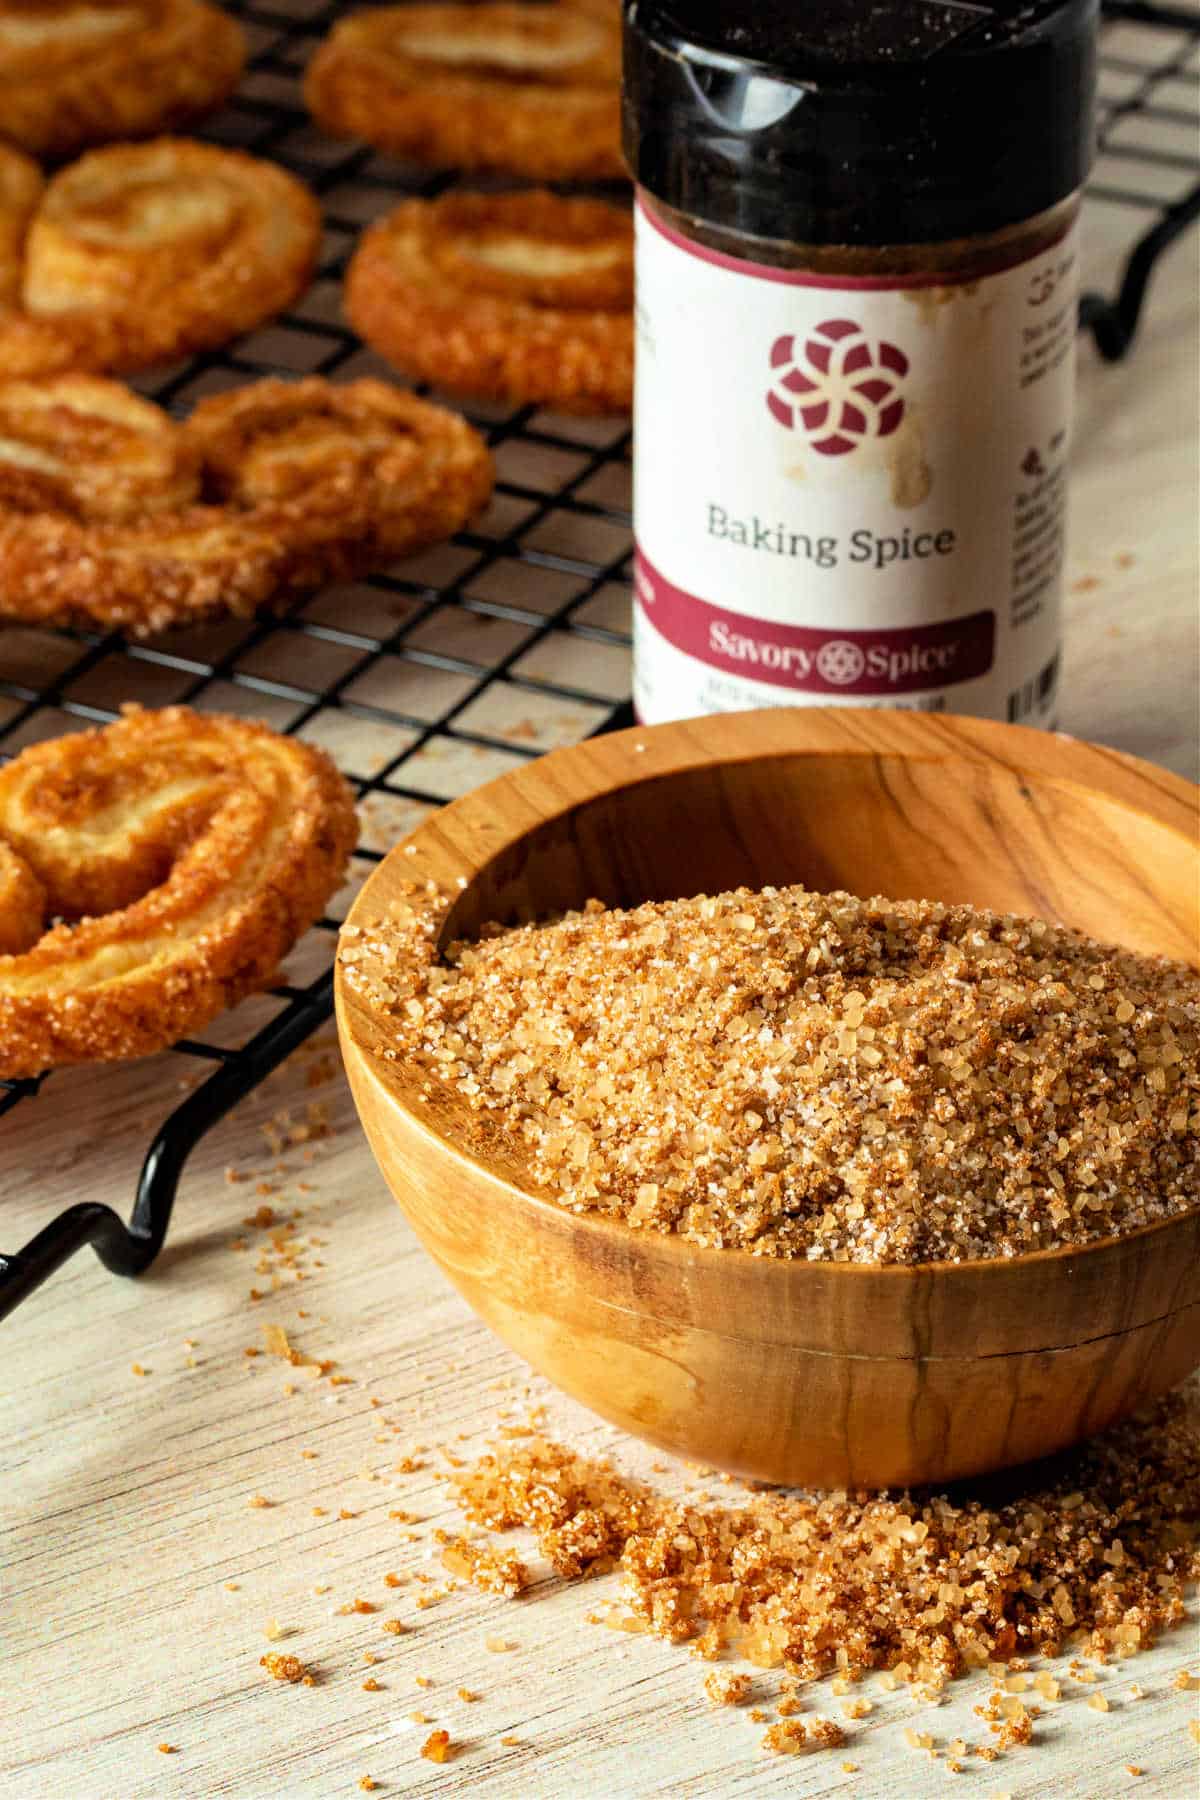 A wooden bowl of mixed sugar and spice with a jar of baking spice behind it and a metal cooling rack of palmiers.